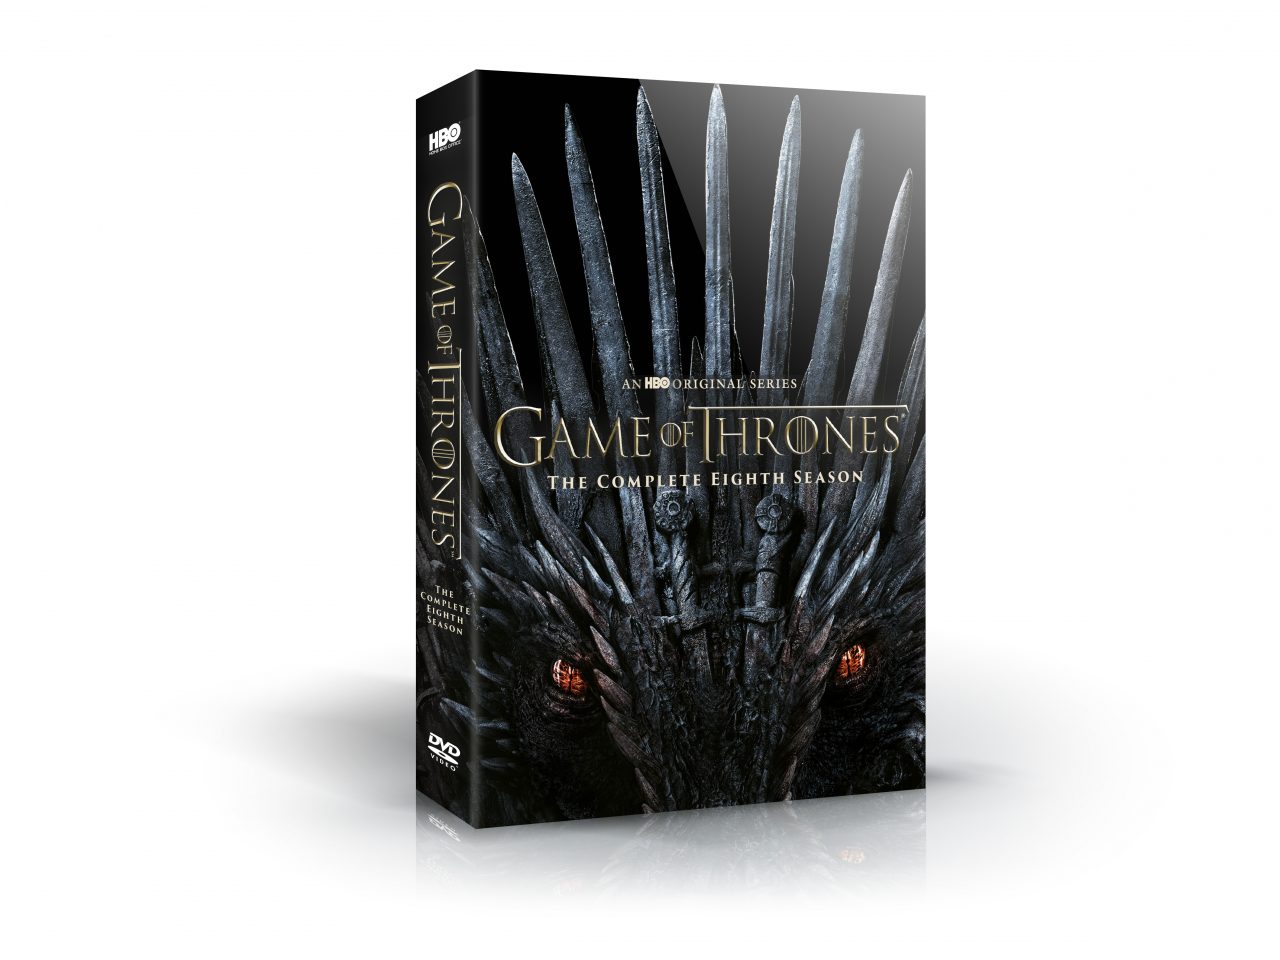 Game Of Thrones The Complete Eighth Season DVD (HBO)